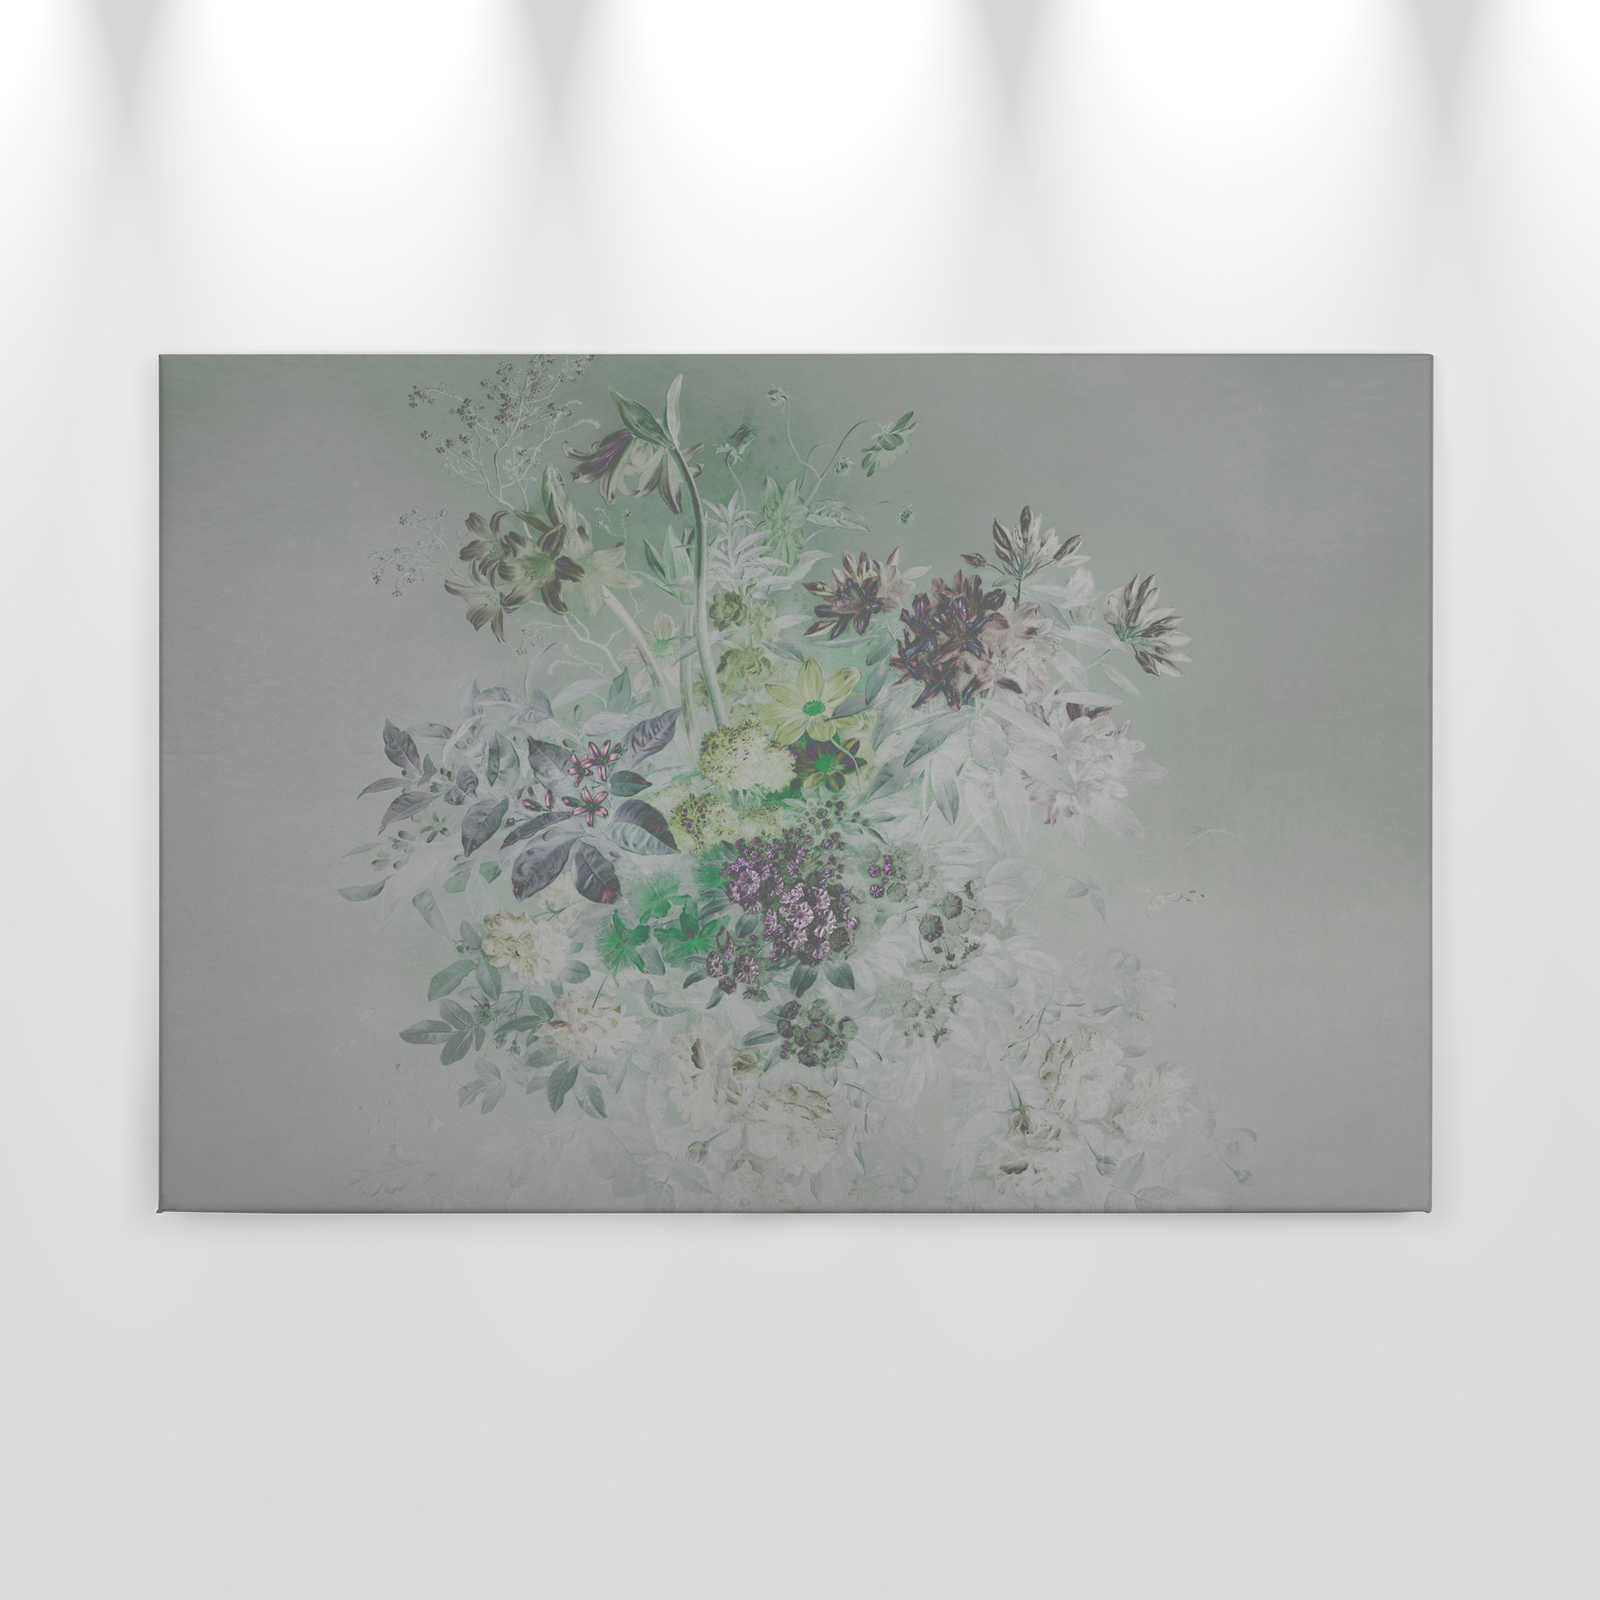             Canvas painting Flowers with Vintage Design - 0,90 m x 0,60 m
        